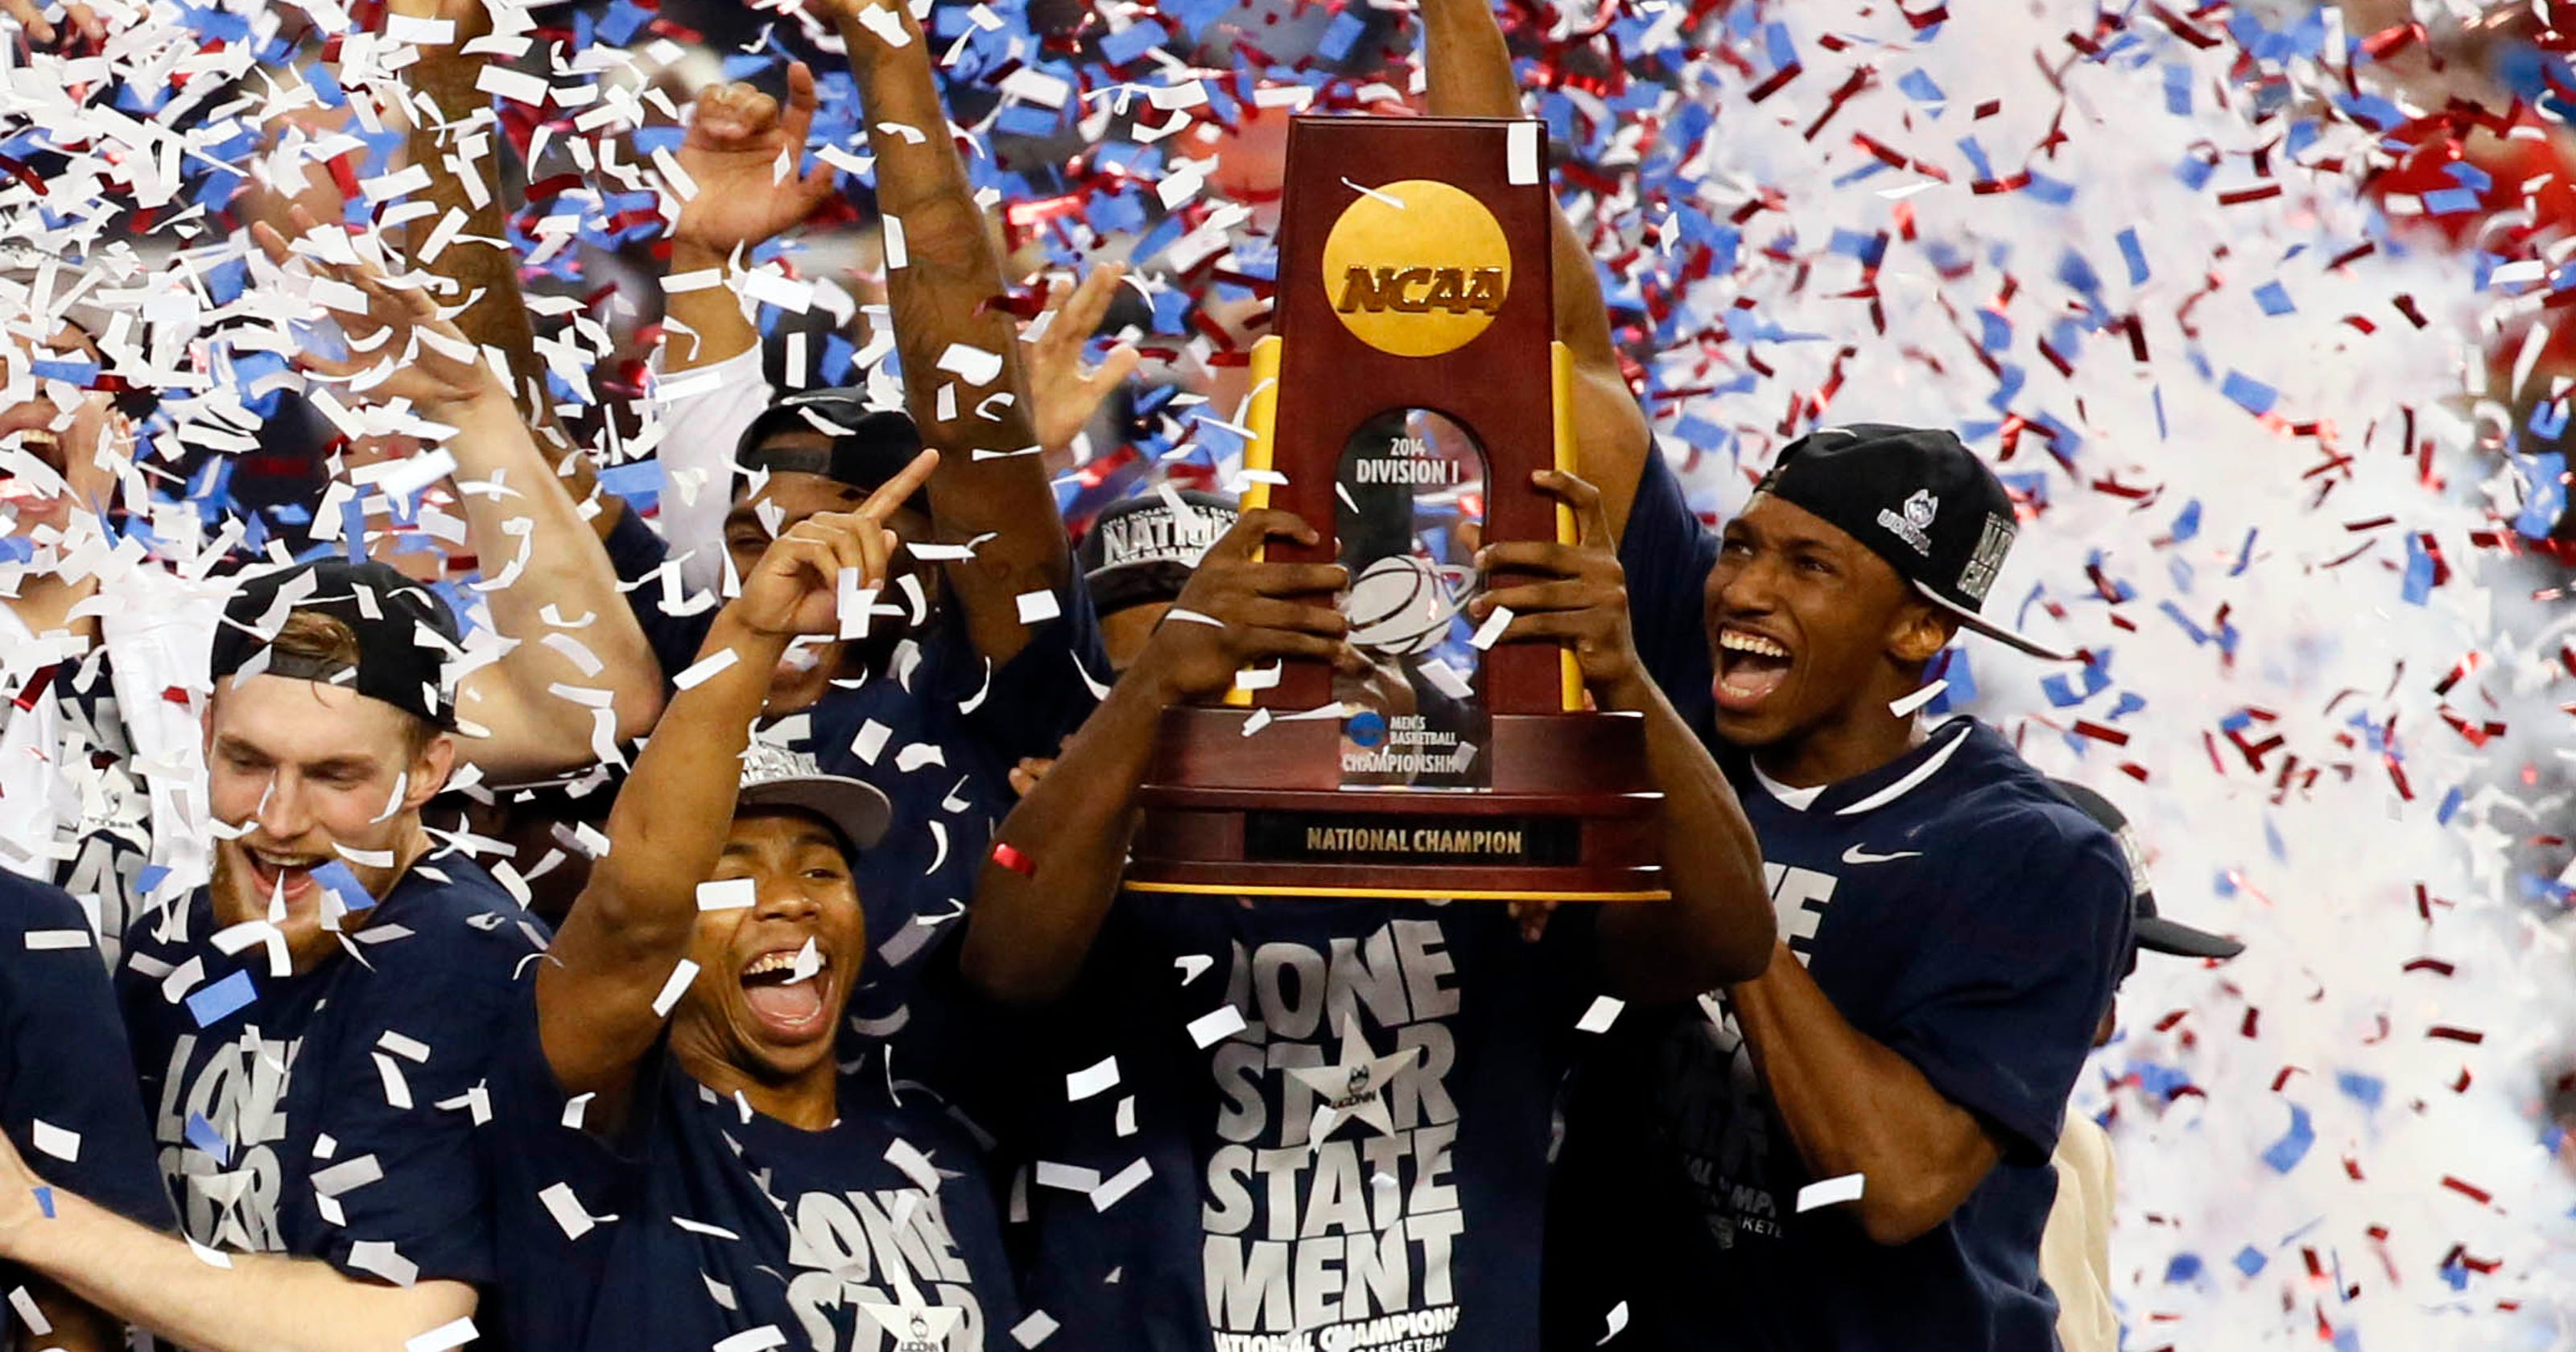 American Athletic Conference revels in big debut with UConn title